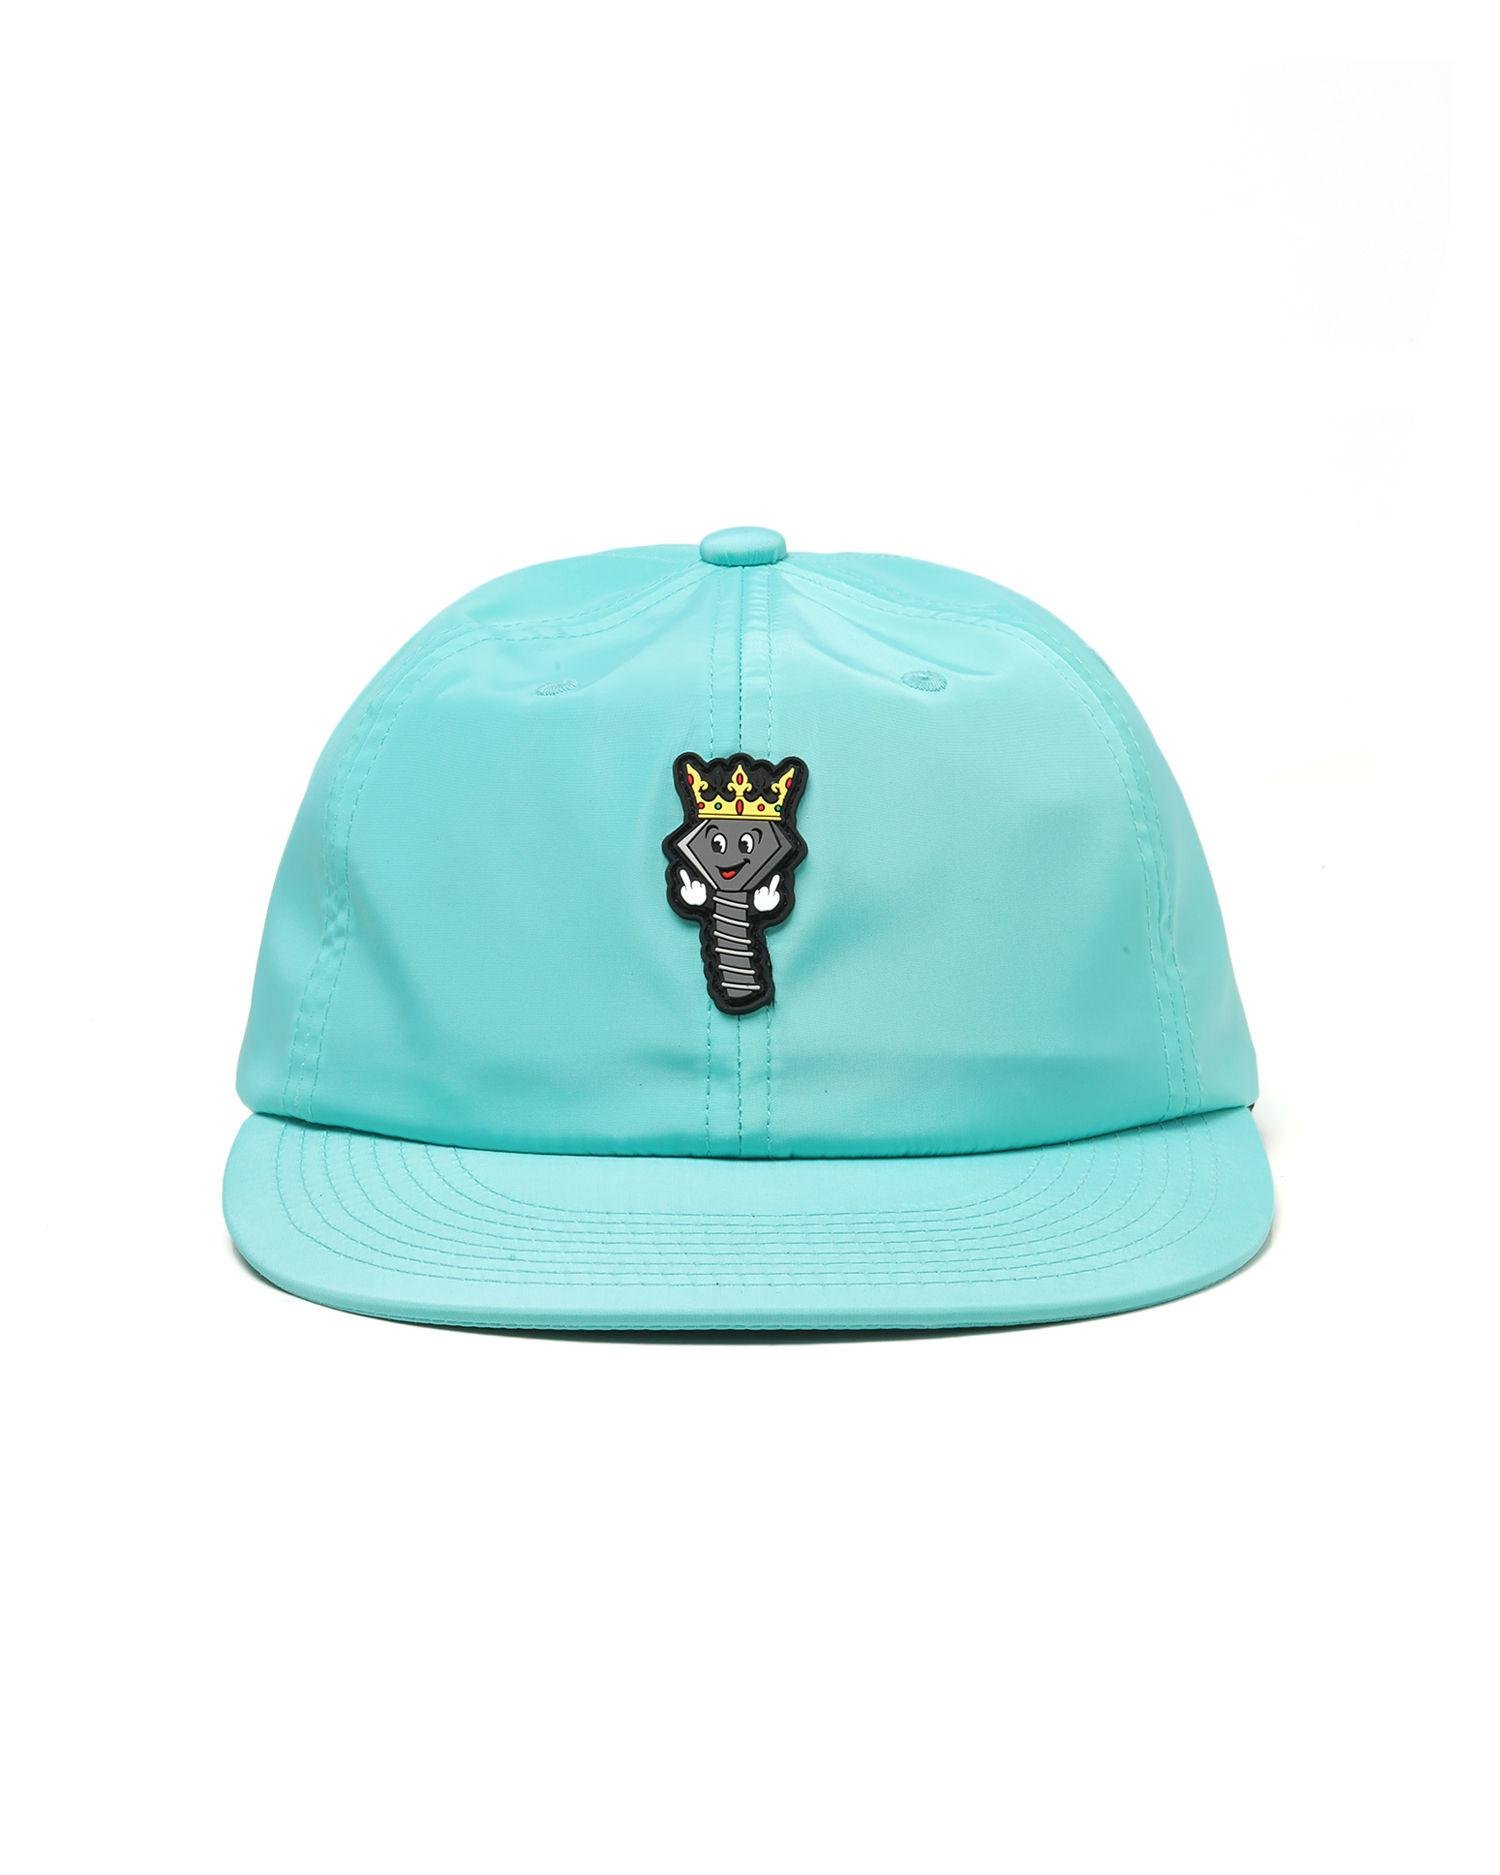 Kings of Hardware cap by DIAMOND SUPPLY CO.